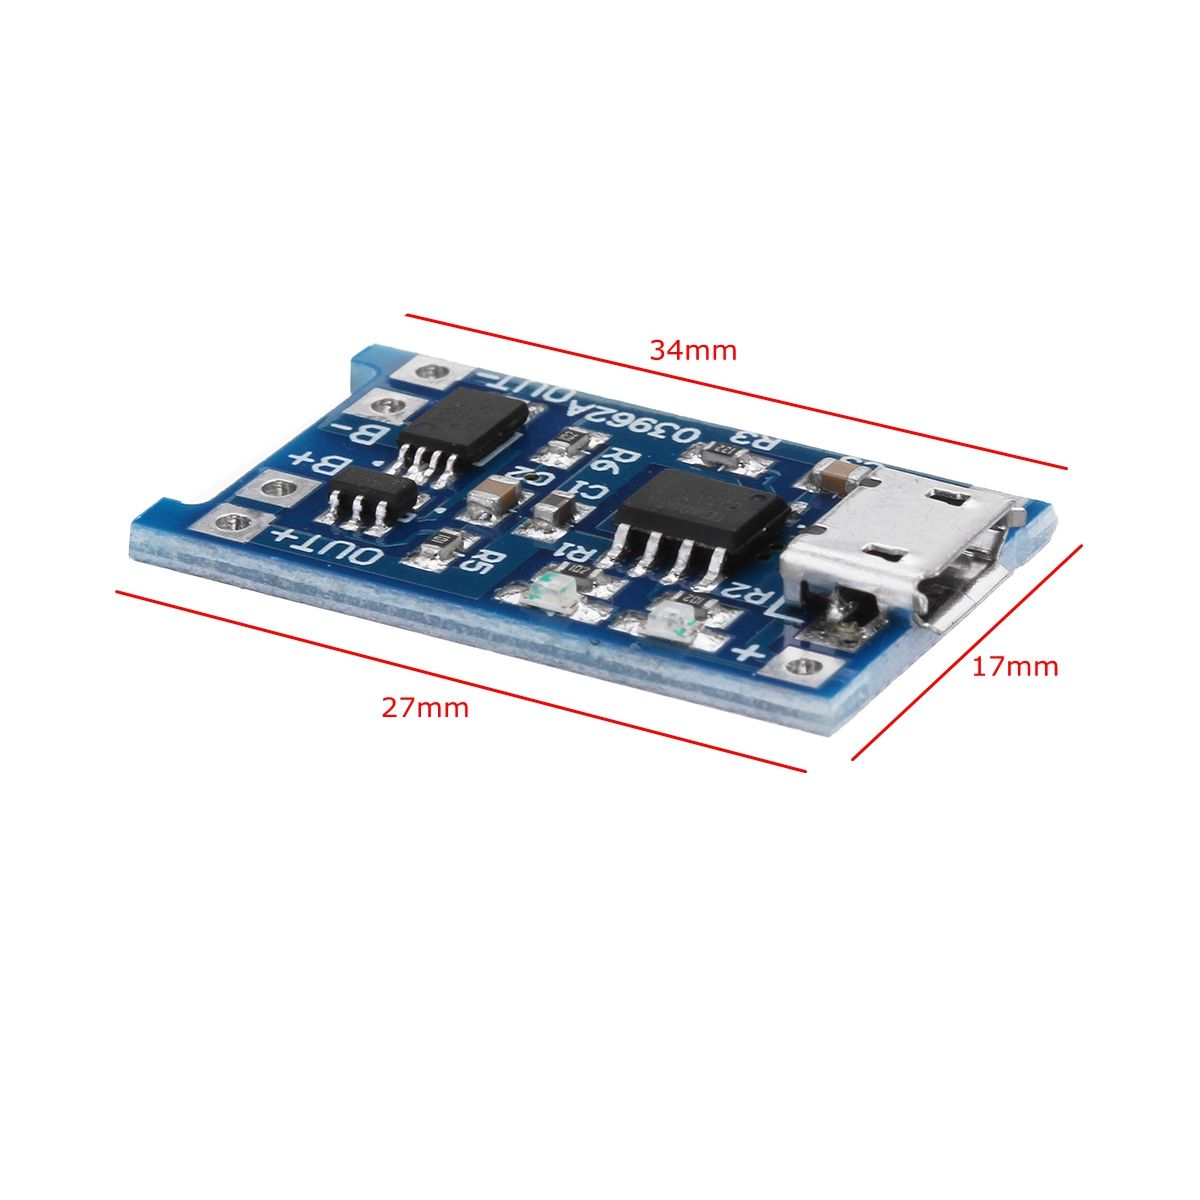 5Pcs-TP4056-Micro-USB-5V-1A-Lithium-Battery-Charging-Protection-Board-TE585-Lipo-Charger-Module-1255762